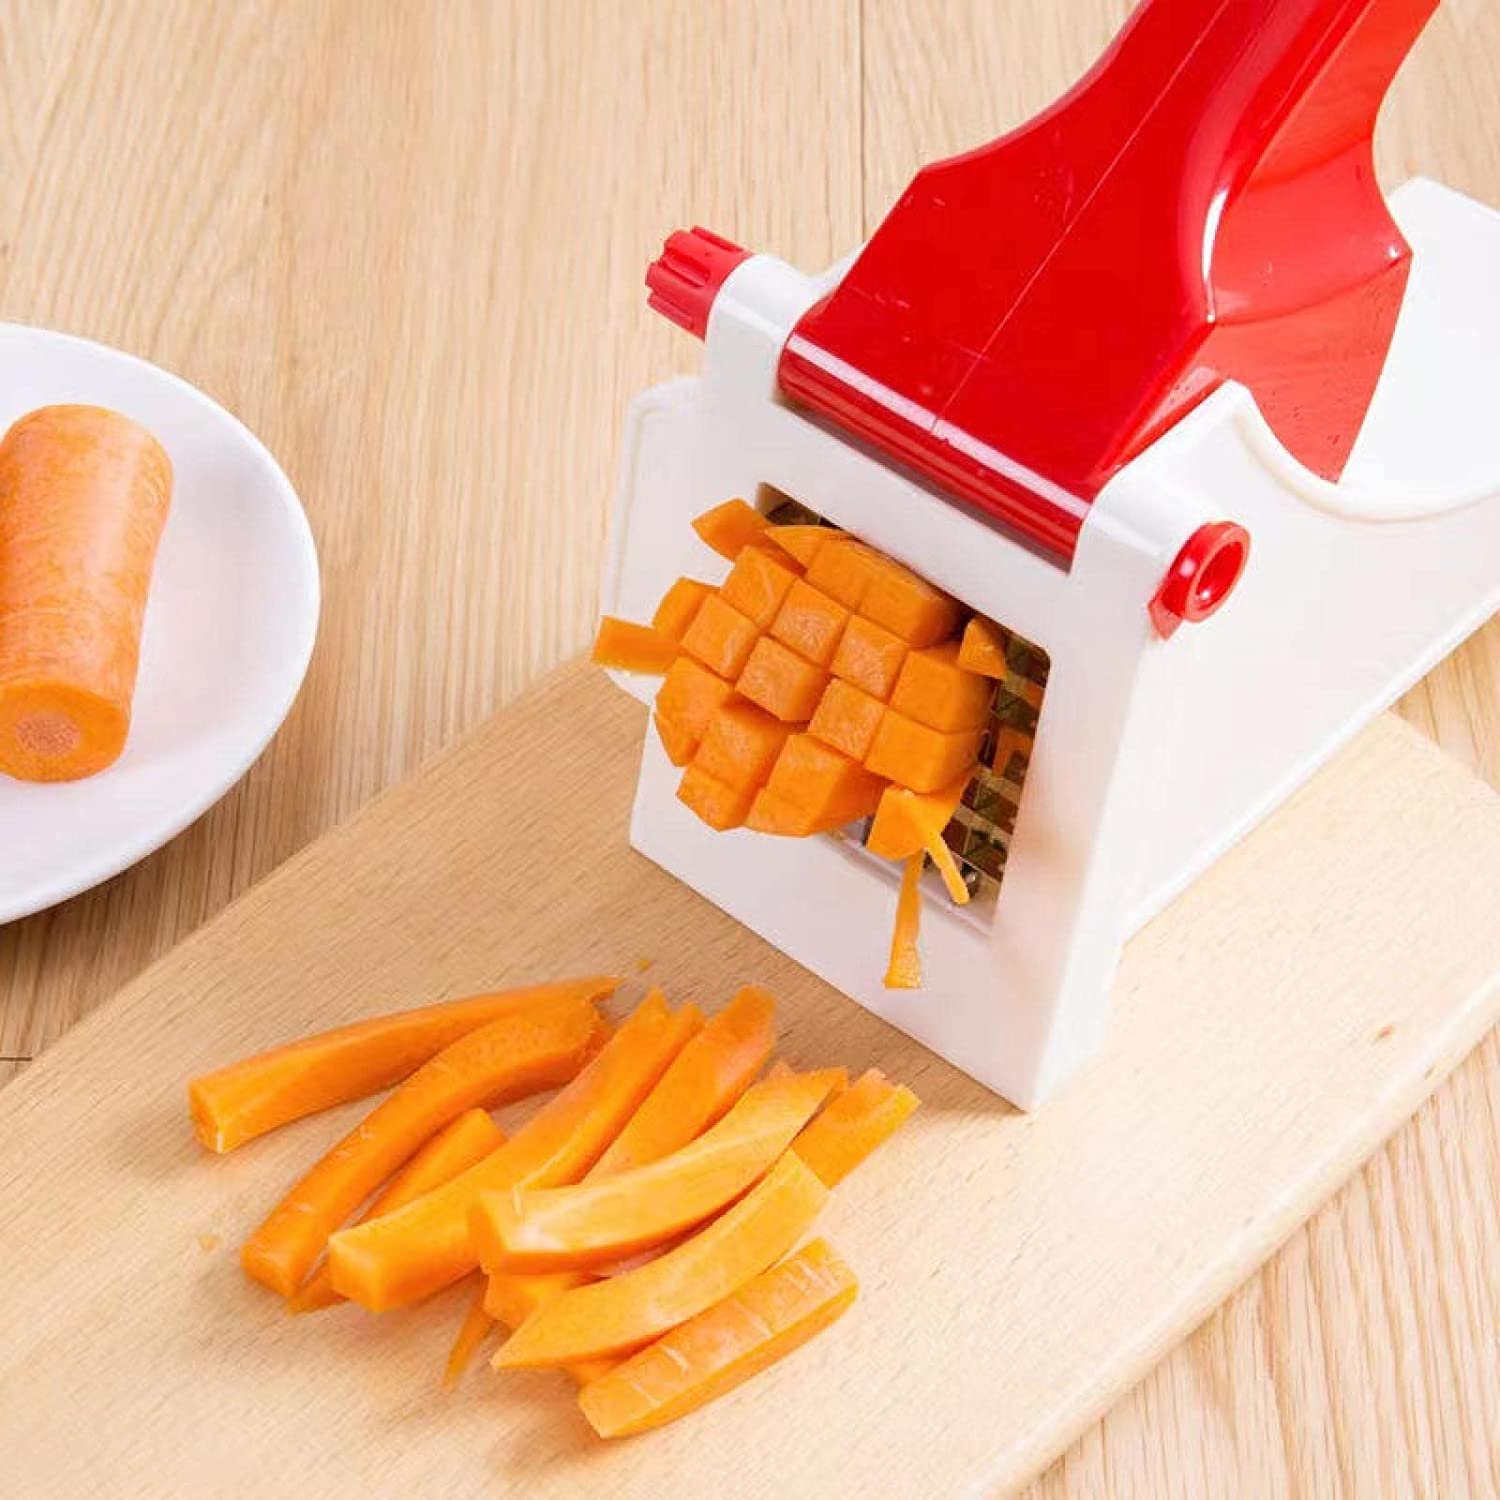 Vegetable Chopper Cutter Potato Onion Kitchen Slicer And Dicer - ChopEase™️